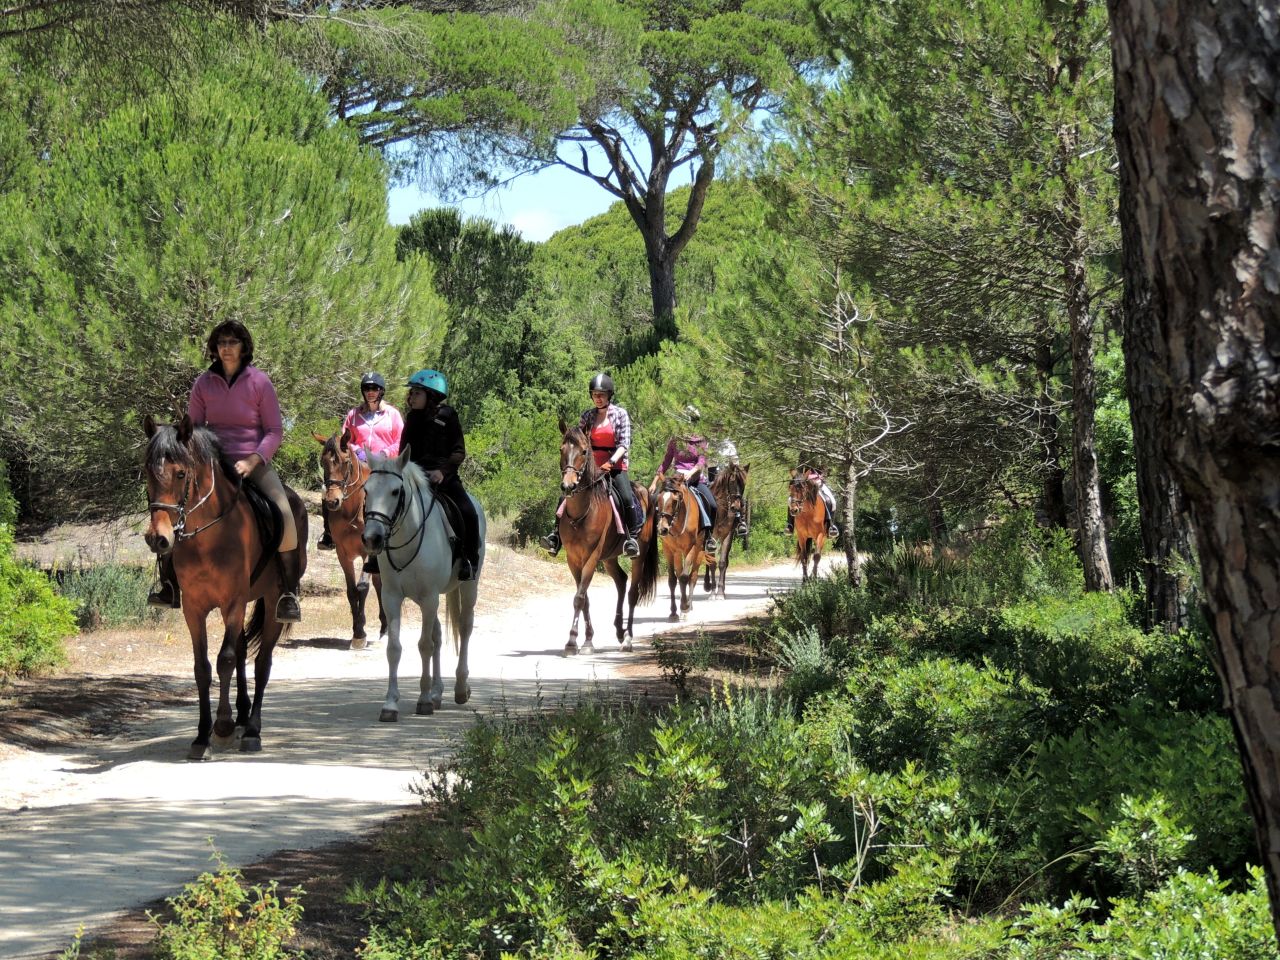 As well as the unspoilt beaches of the Costa de la Luz, there are coastal trails through pine forests, offering tranquility and a counterbalance to the exhilaration of galloping across the sand flats and  breakers.  